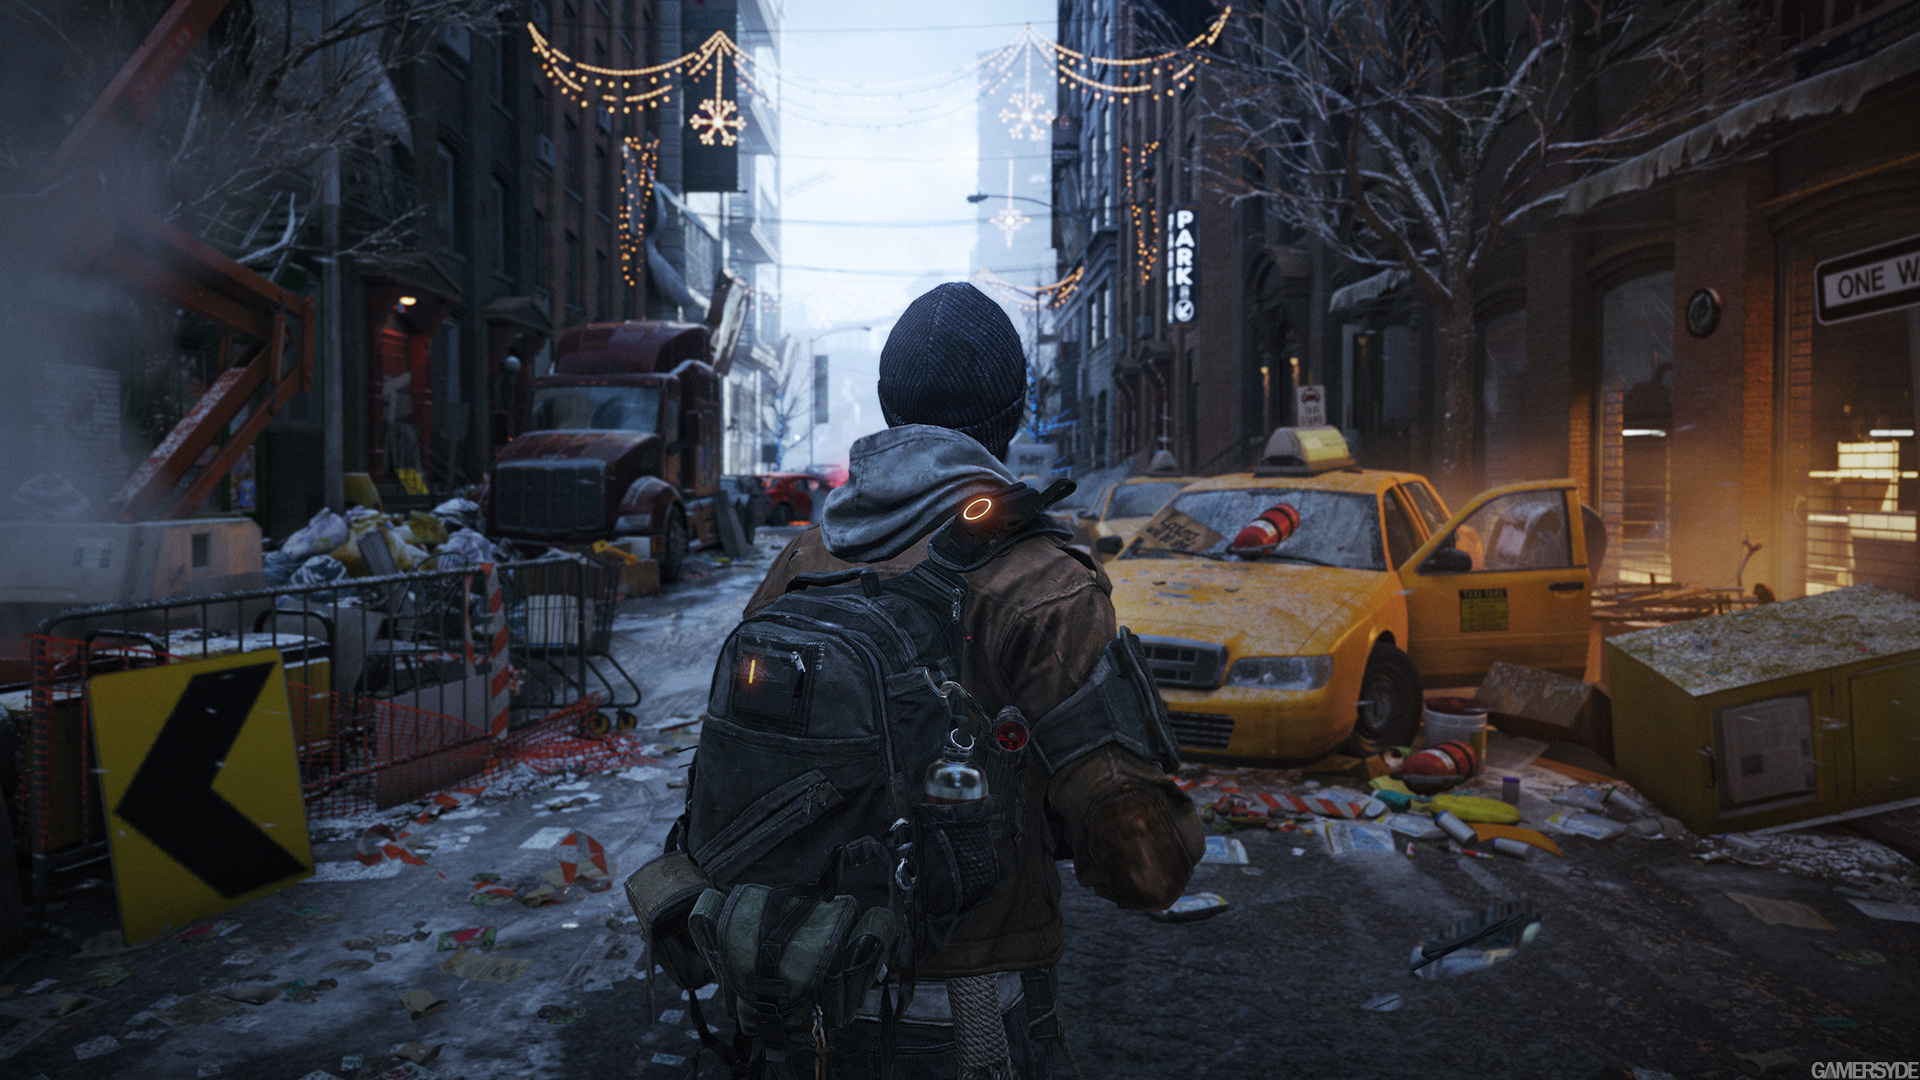 image_tom_clancy_s_the_division-22299-2751_0004.jpg